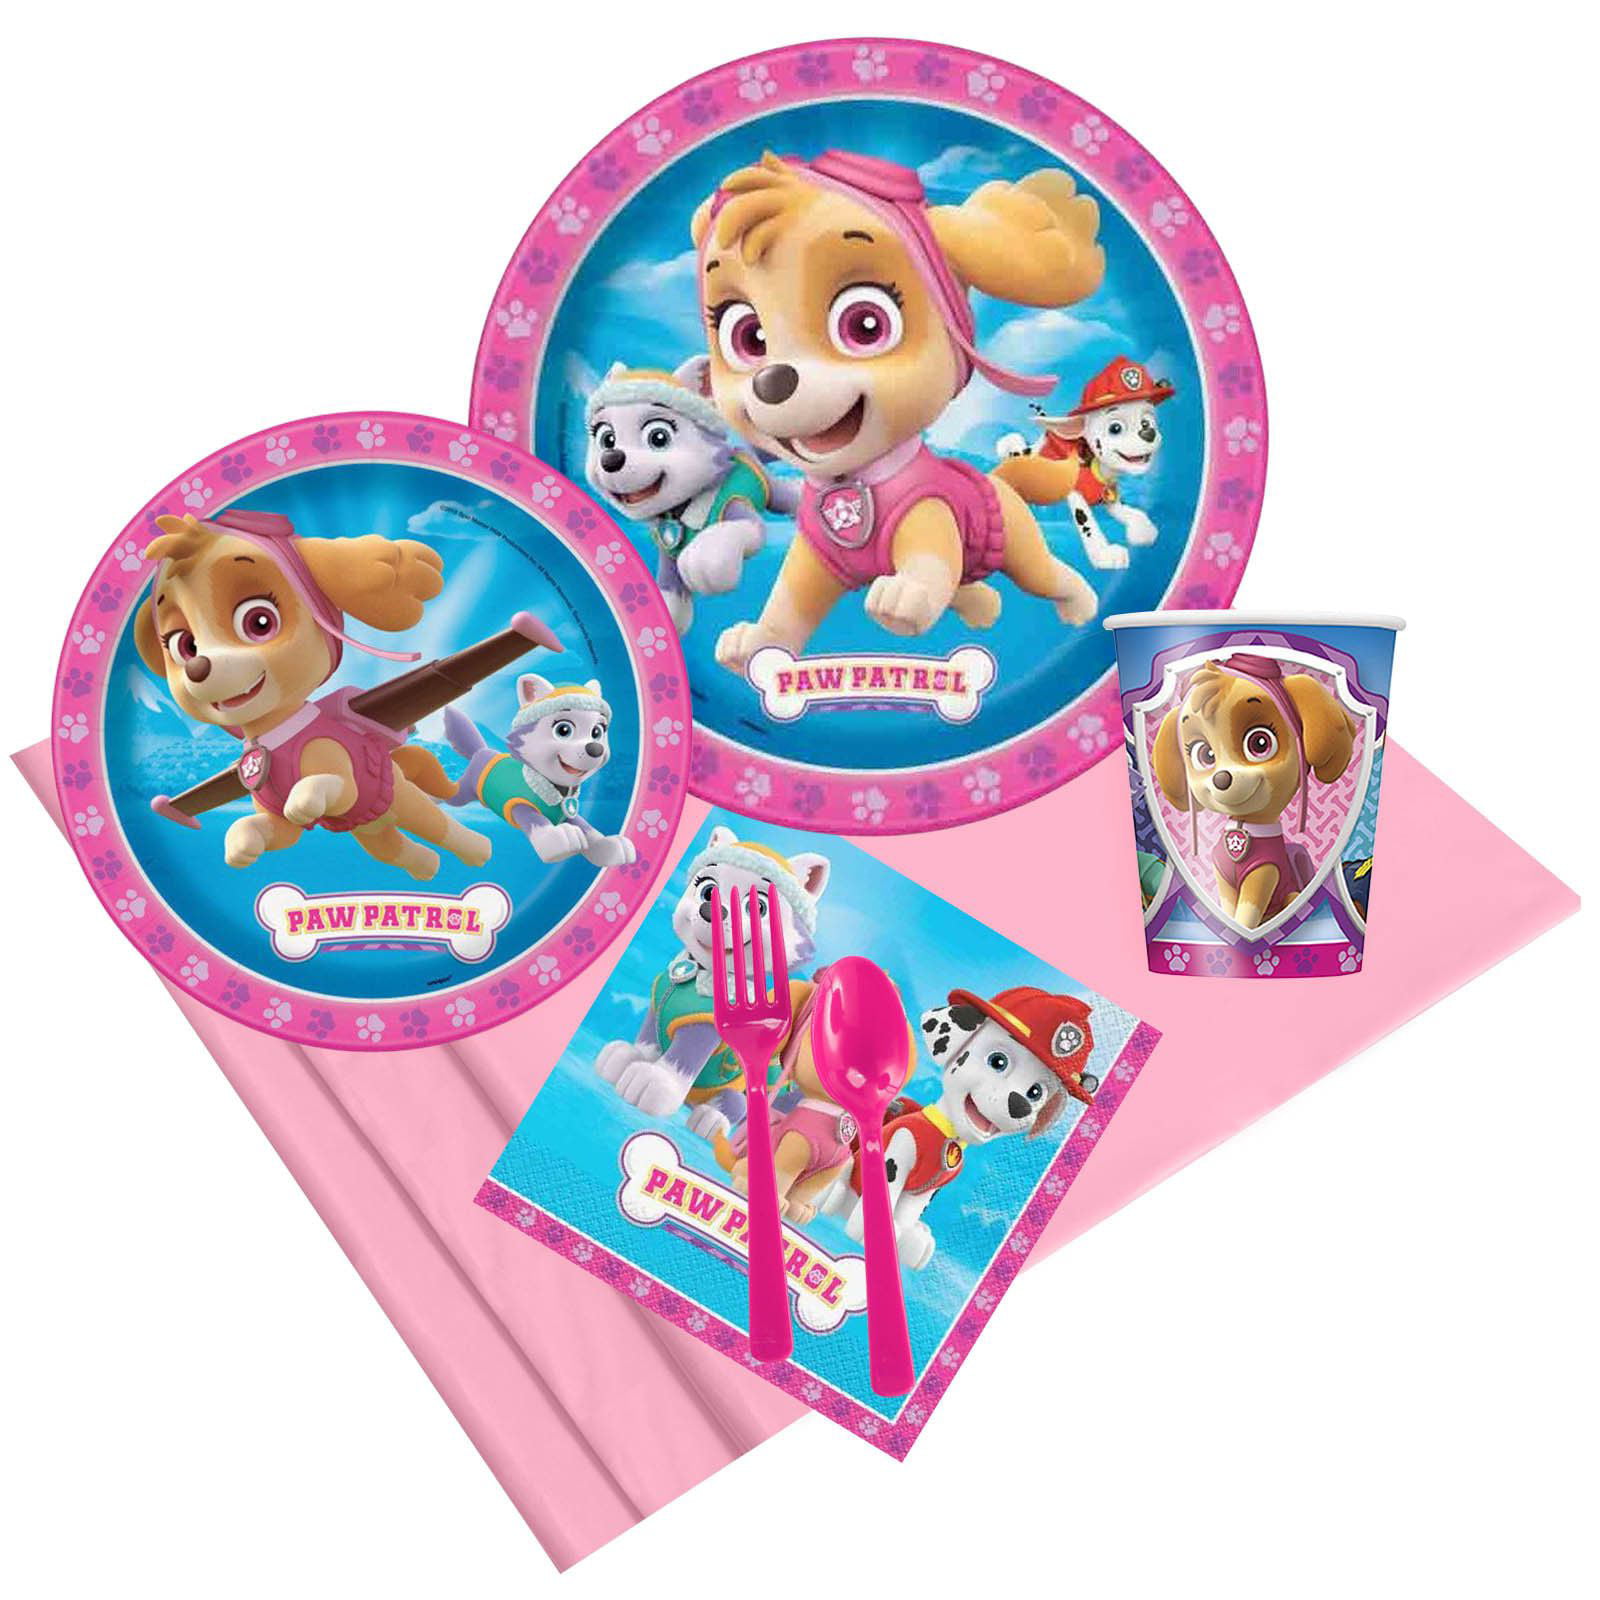 Paw Patrol Party Pack for 8 